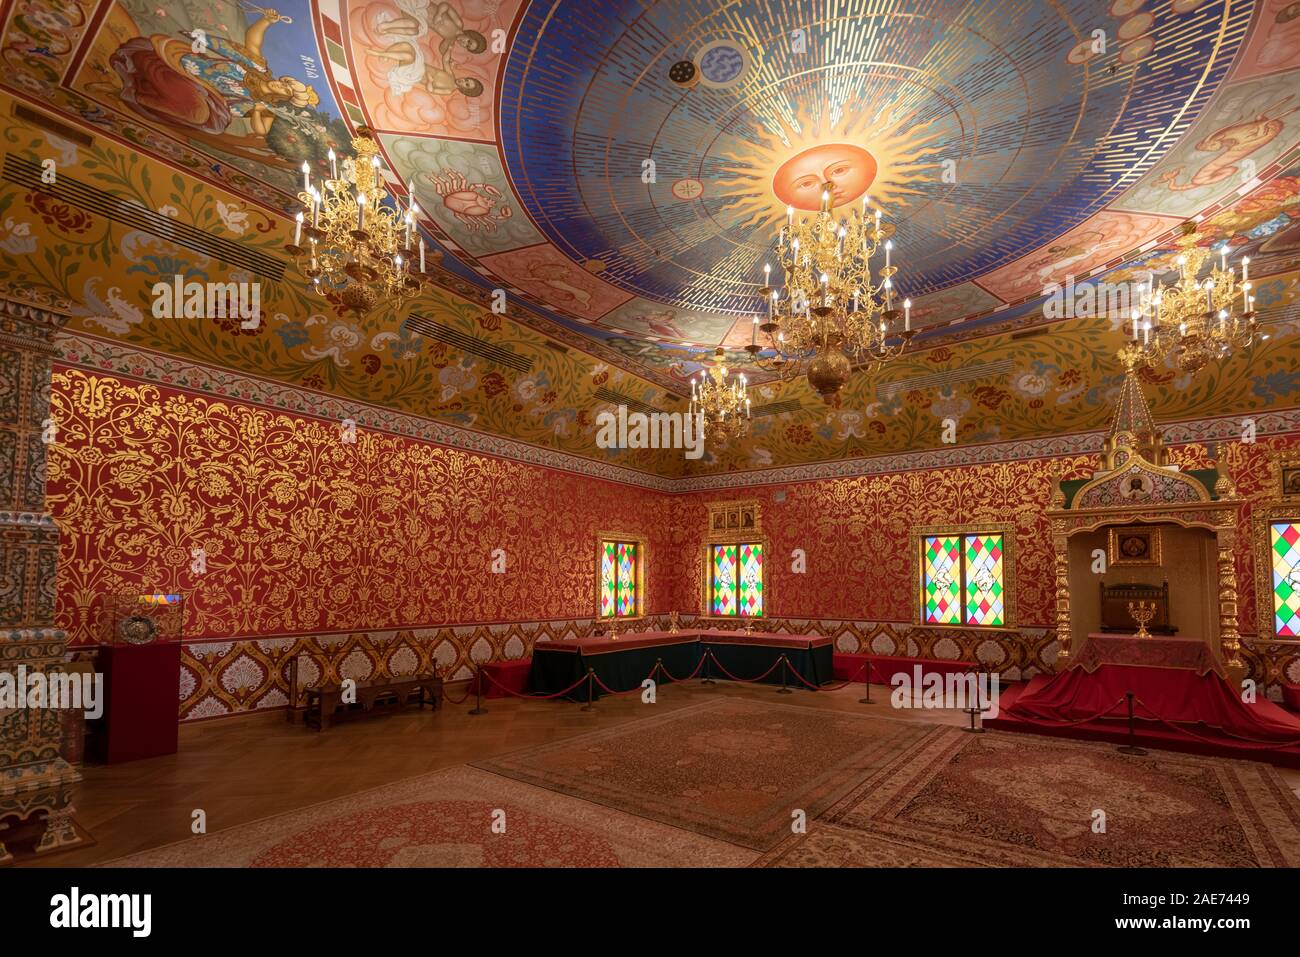 Inside interior of The wooden palace or castle or dvorets of Tsar Aleksey Mikhailovich in Kolomenskoye. Royal residence Museum-Reserve Moscow, Russia Stock Photo